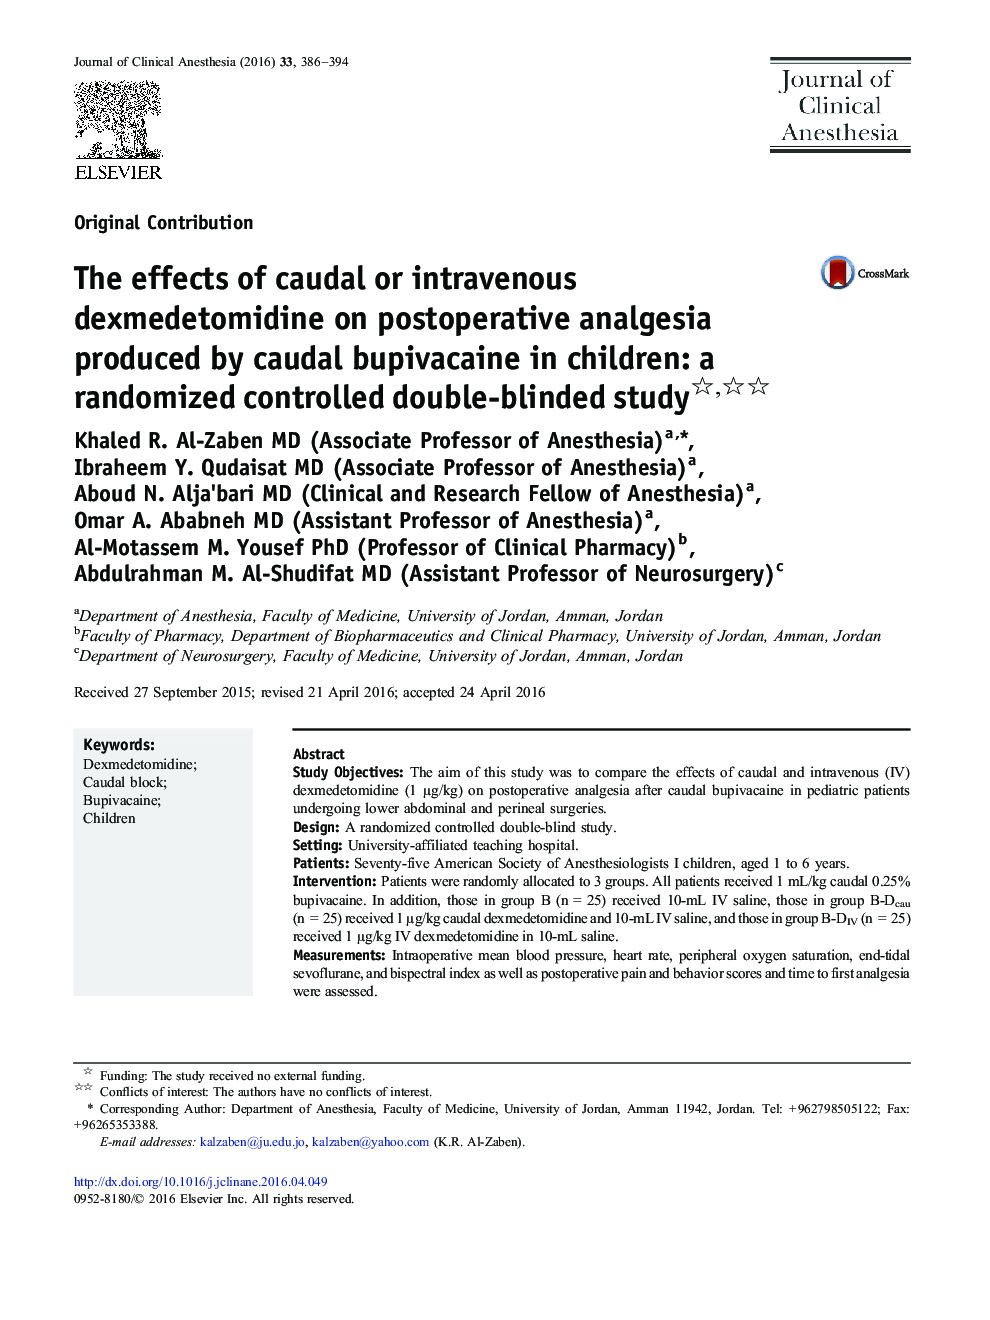 The effects of caudal or intravenous dexmedetomidine on postoperative analgesia produced by caudal bupivacaine in children: a randomized controlled double-blinded study 